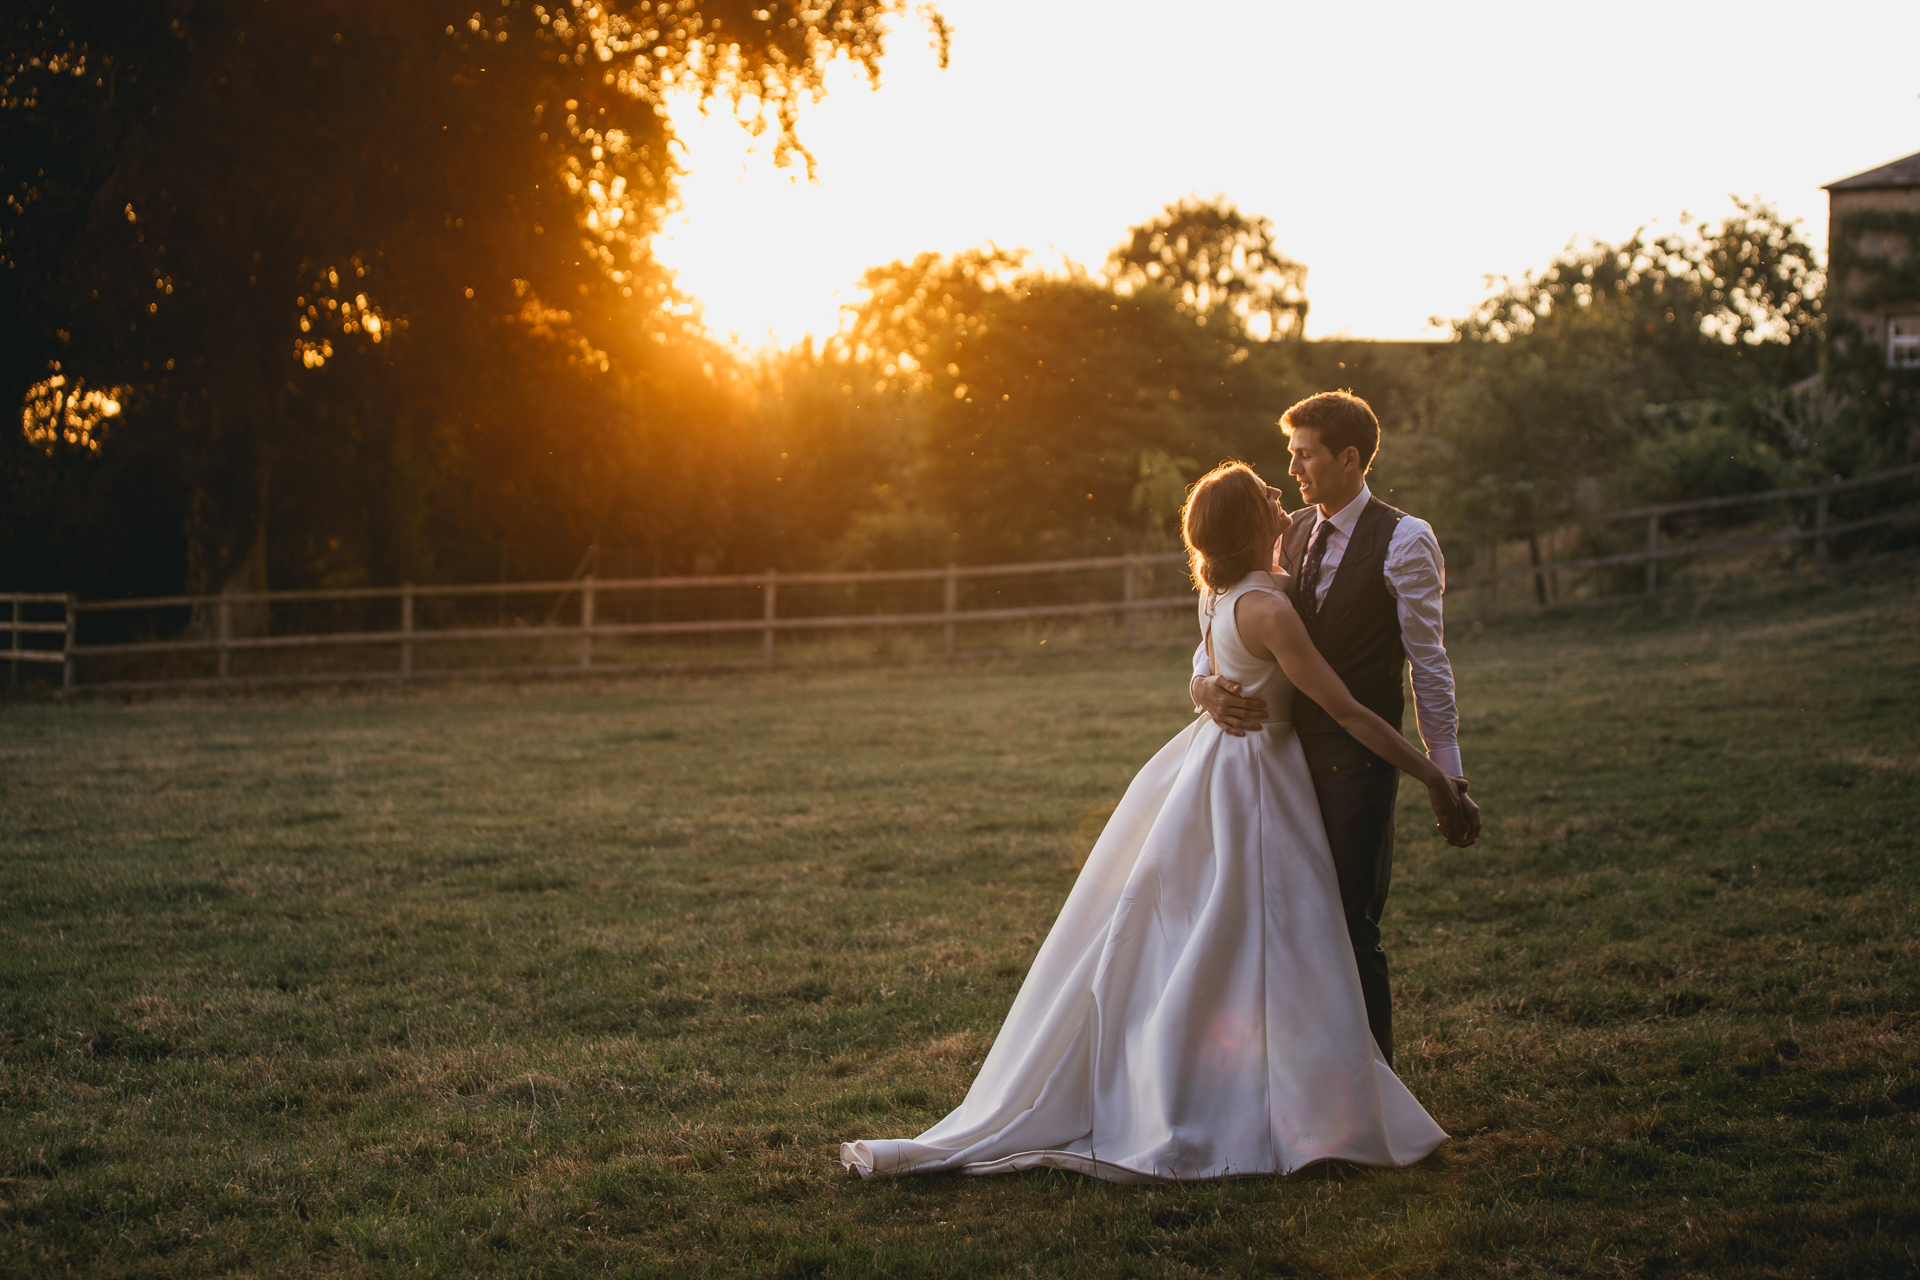 Bride and groom cuddling in sunset